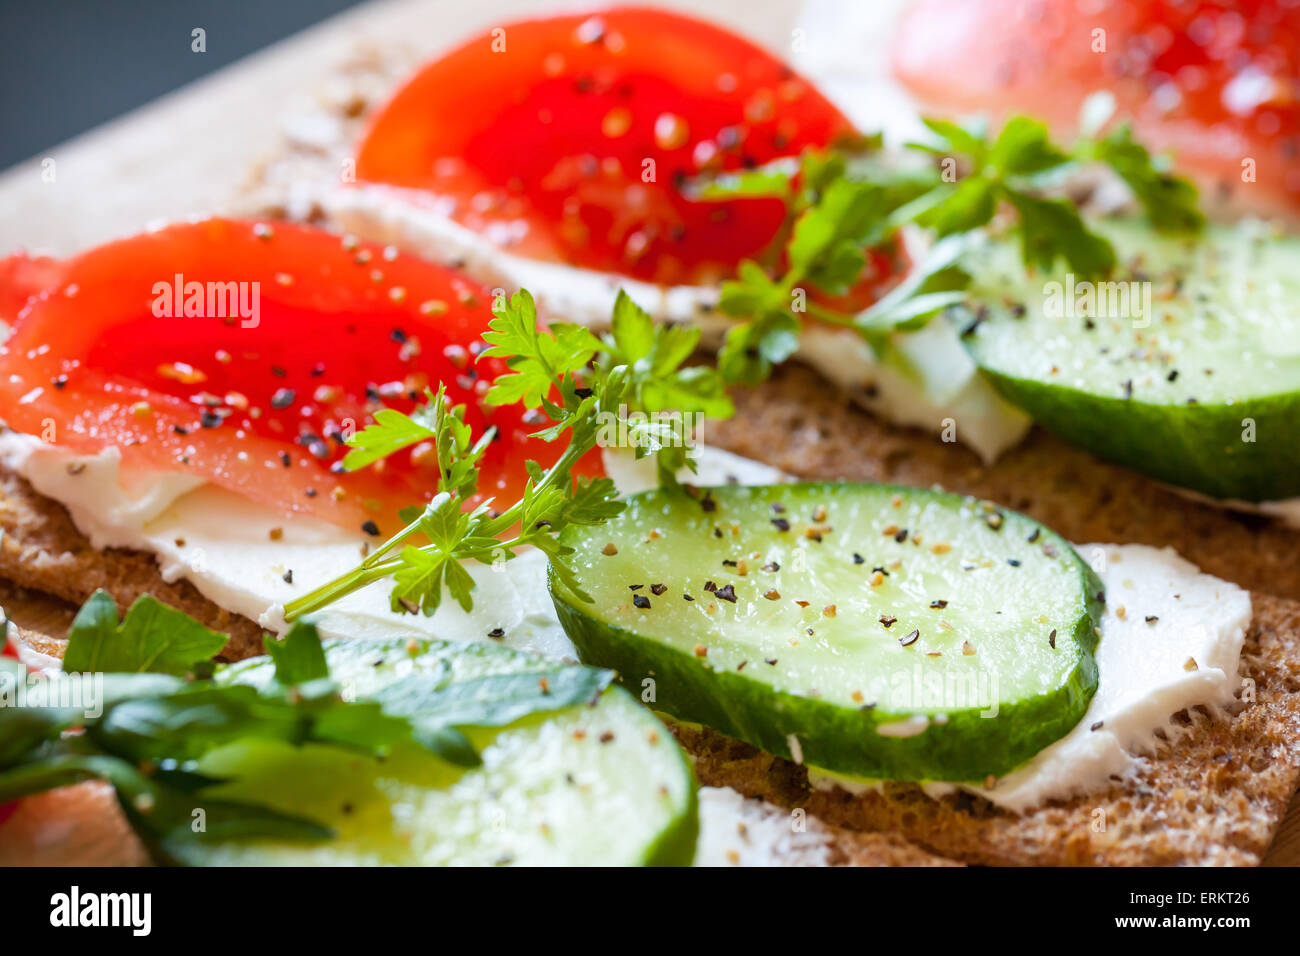 Healthy food, breakfast sandwiches. Finnish rye crisp bread, soft cheese, cucumber, tomato, parsley and black pepper Stock Photo